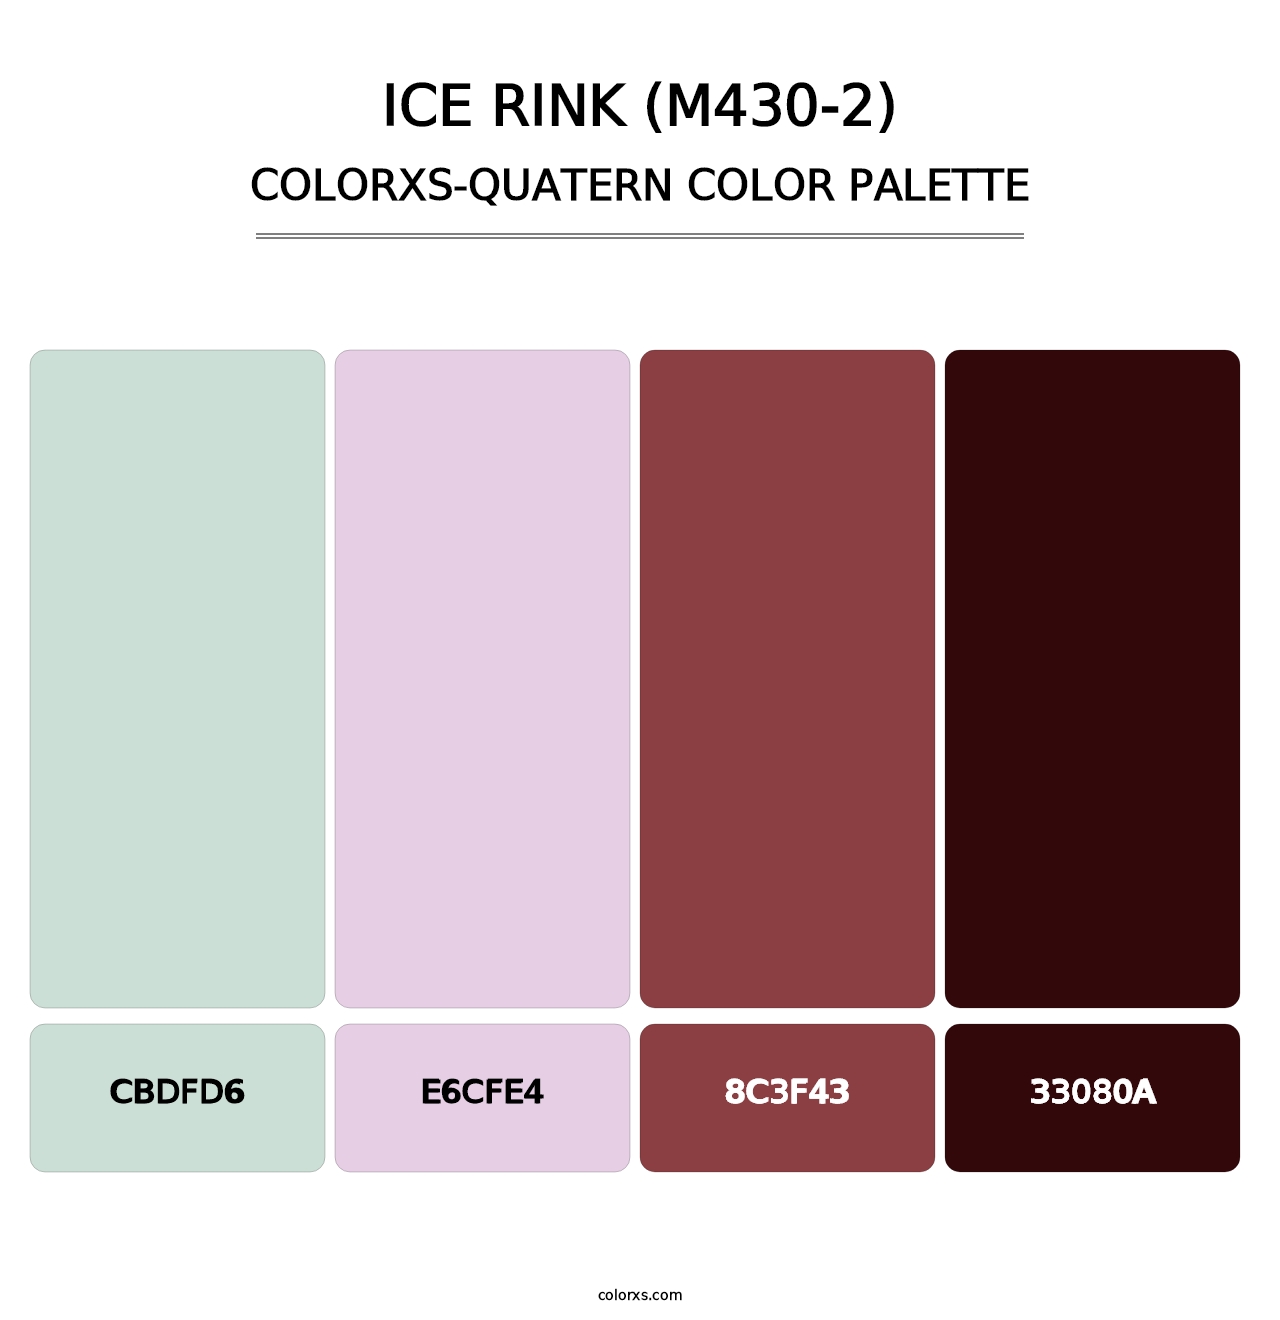 Ice Rink (M430-2) - Colorxs Quatern Palette